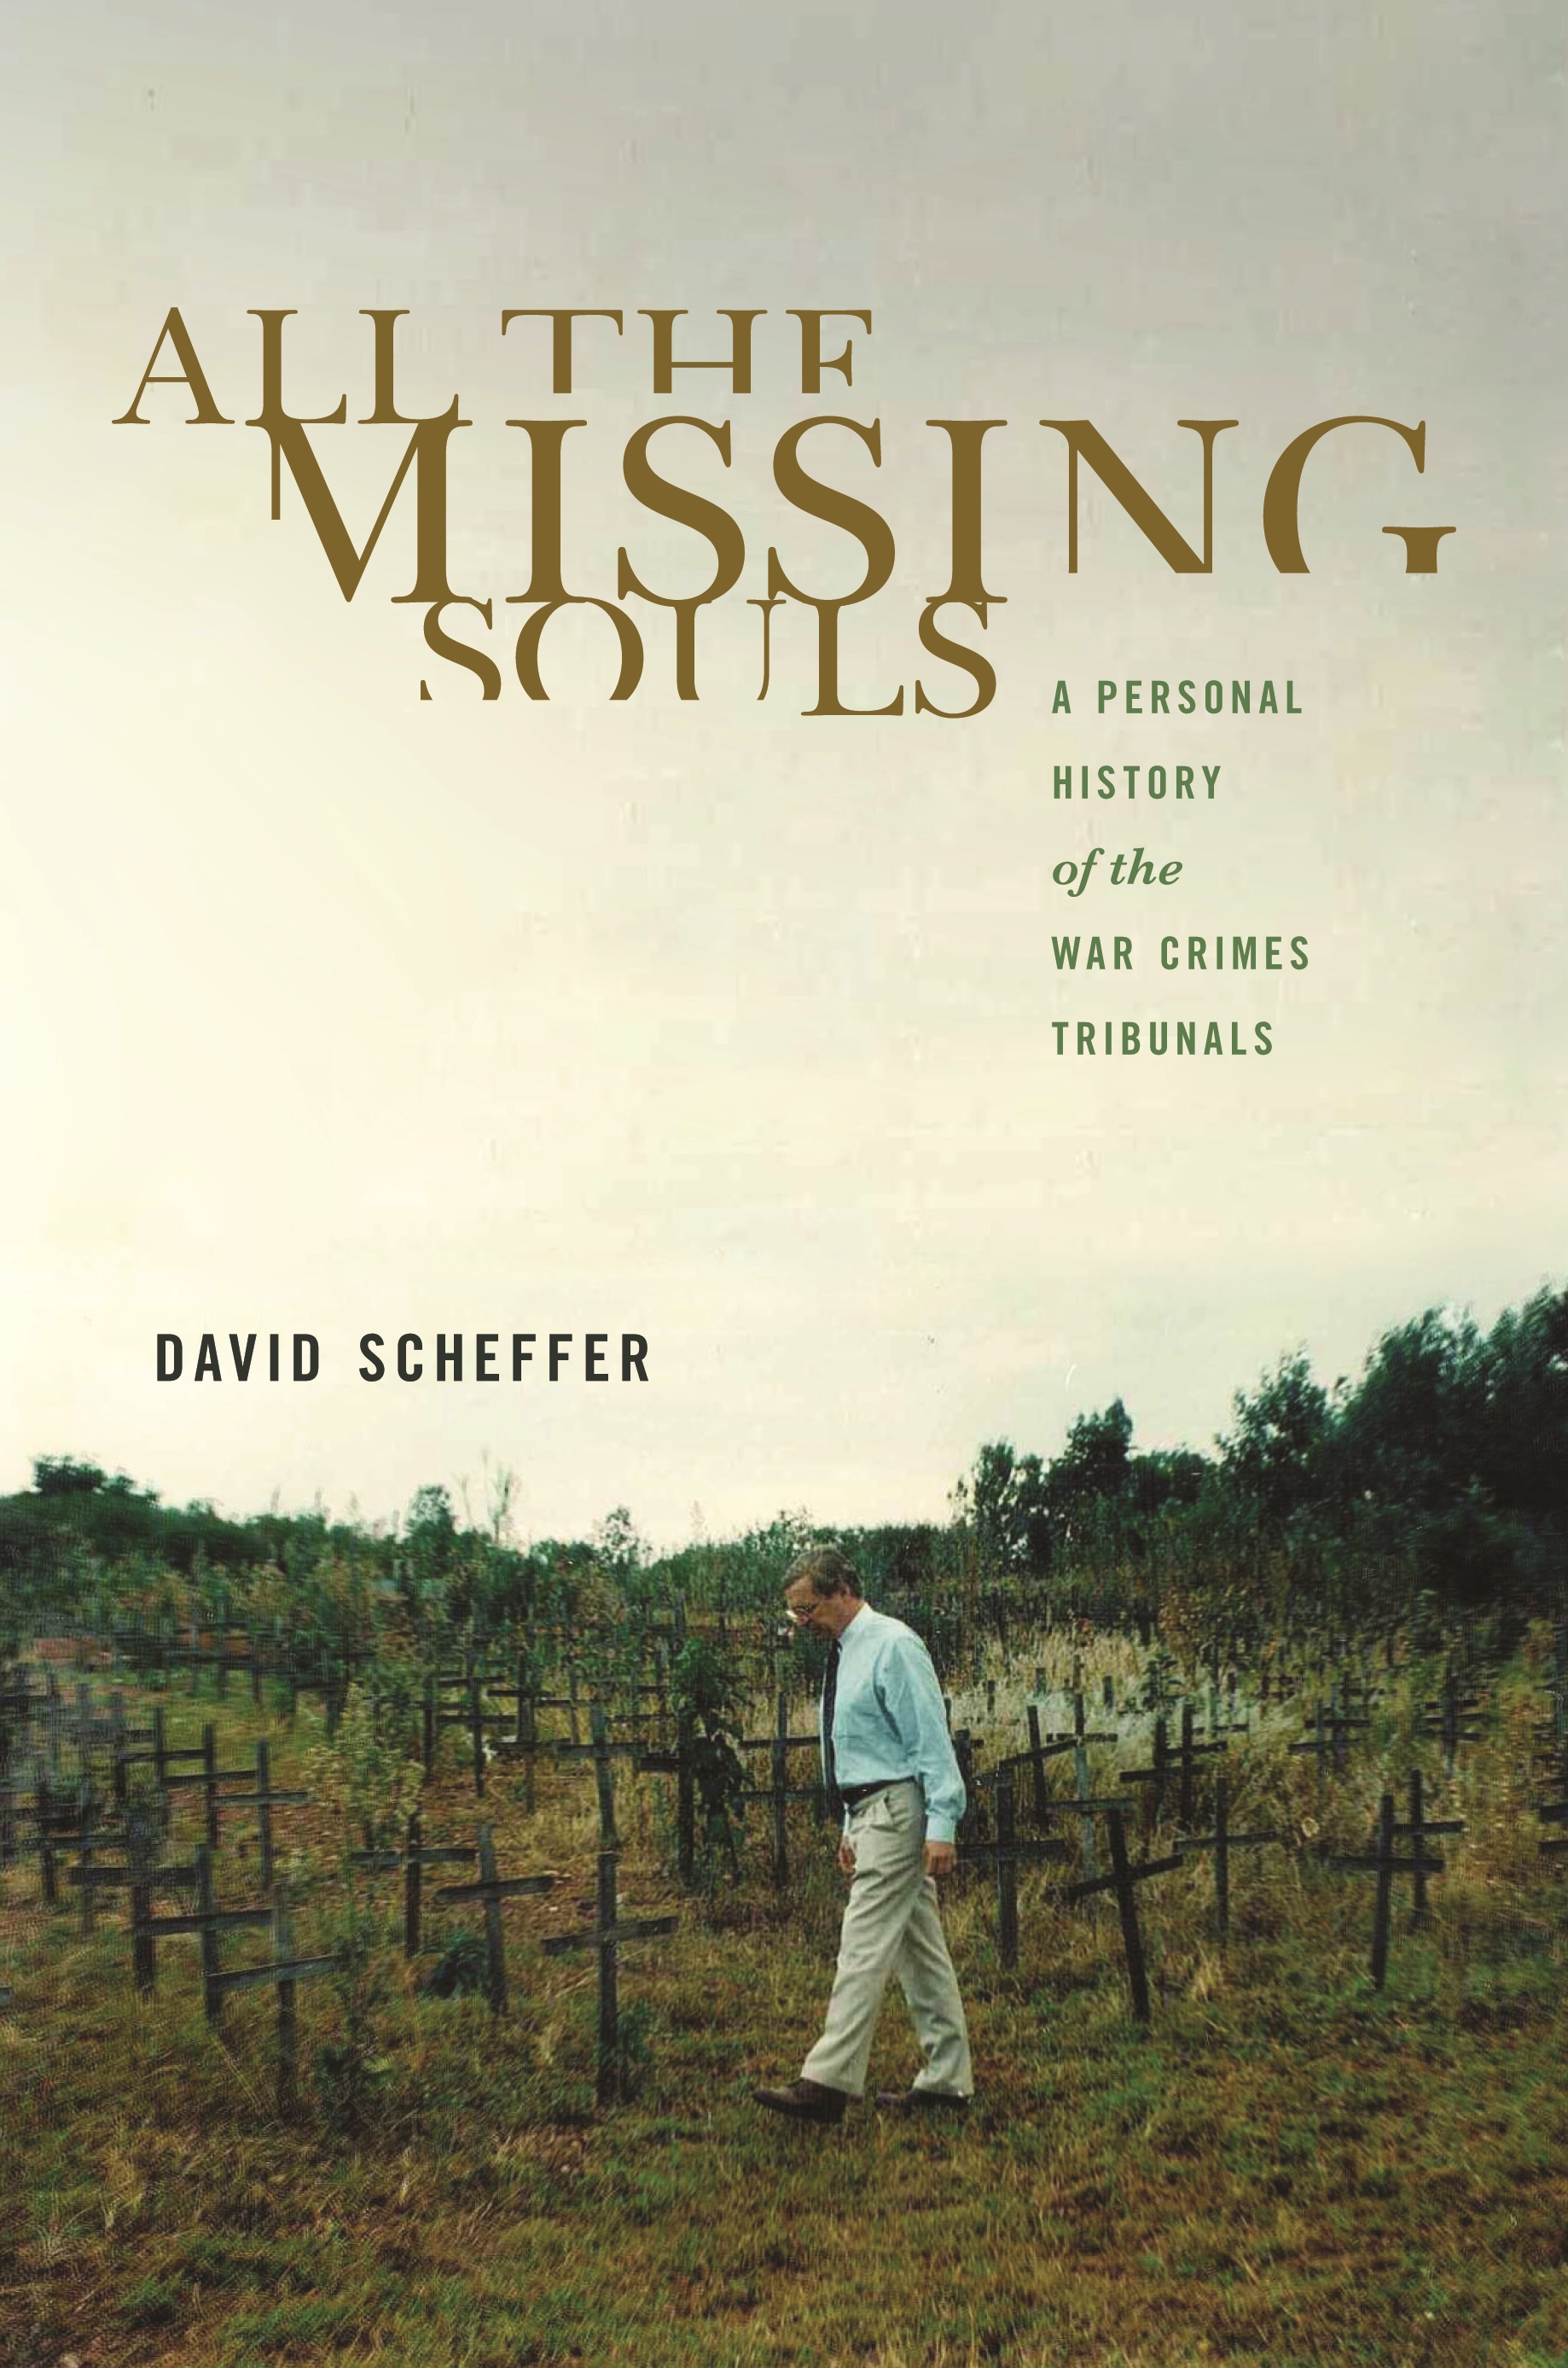 Cover of All the Missing Souls: A Personal History of the War Crimes Tribunals by David Scheffer